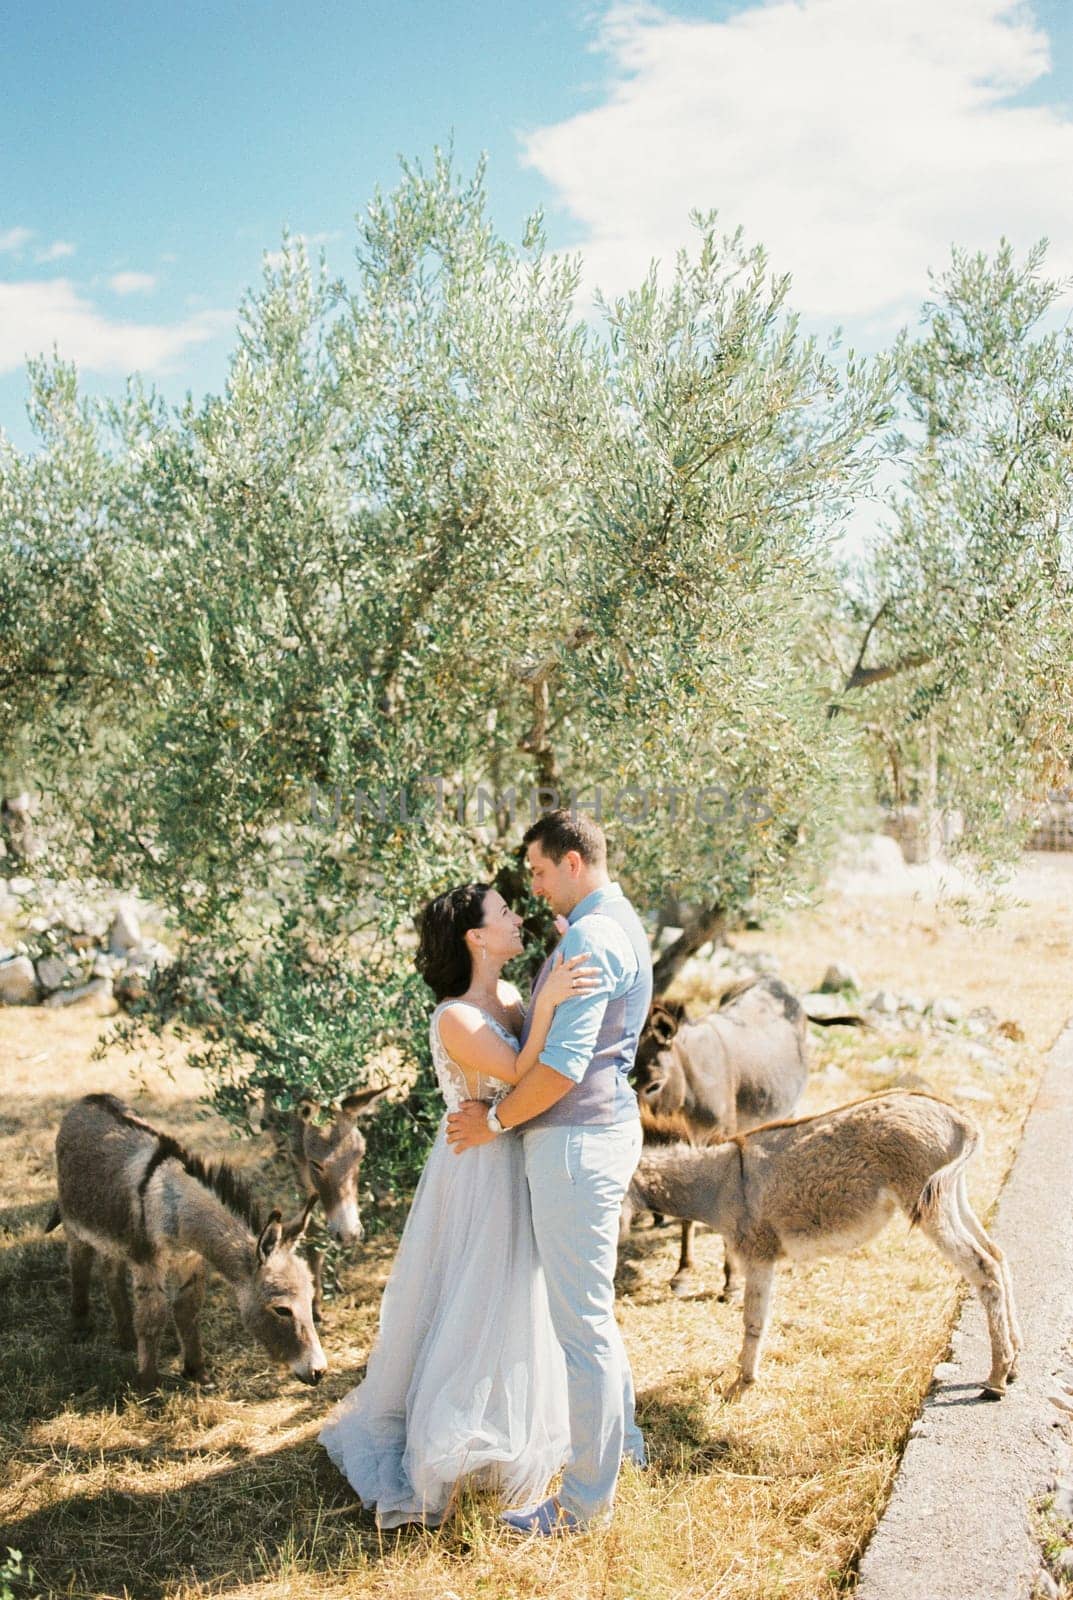 Bride and groom stand hugging under an olive tree near grazing donkeys by Nadtochiy